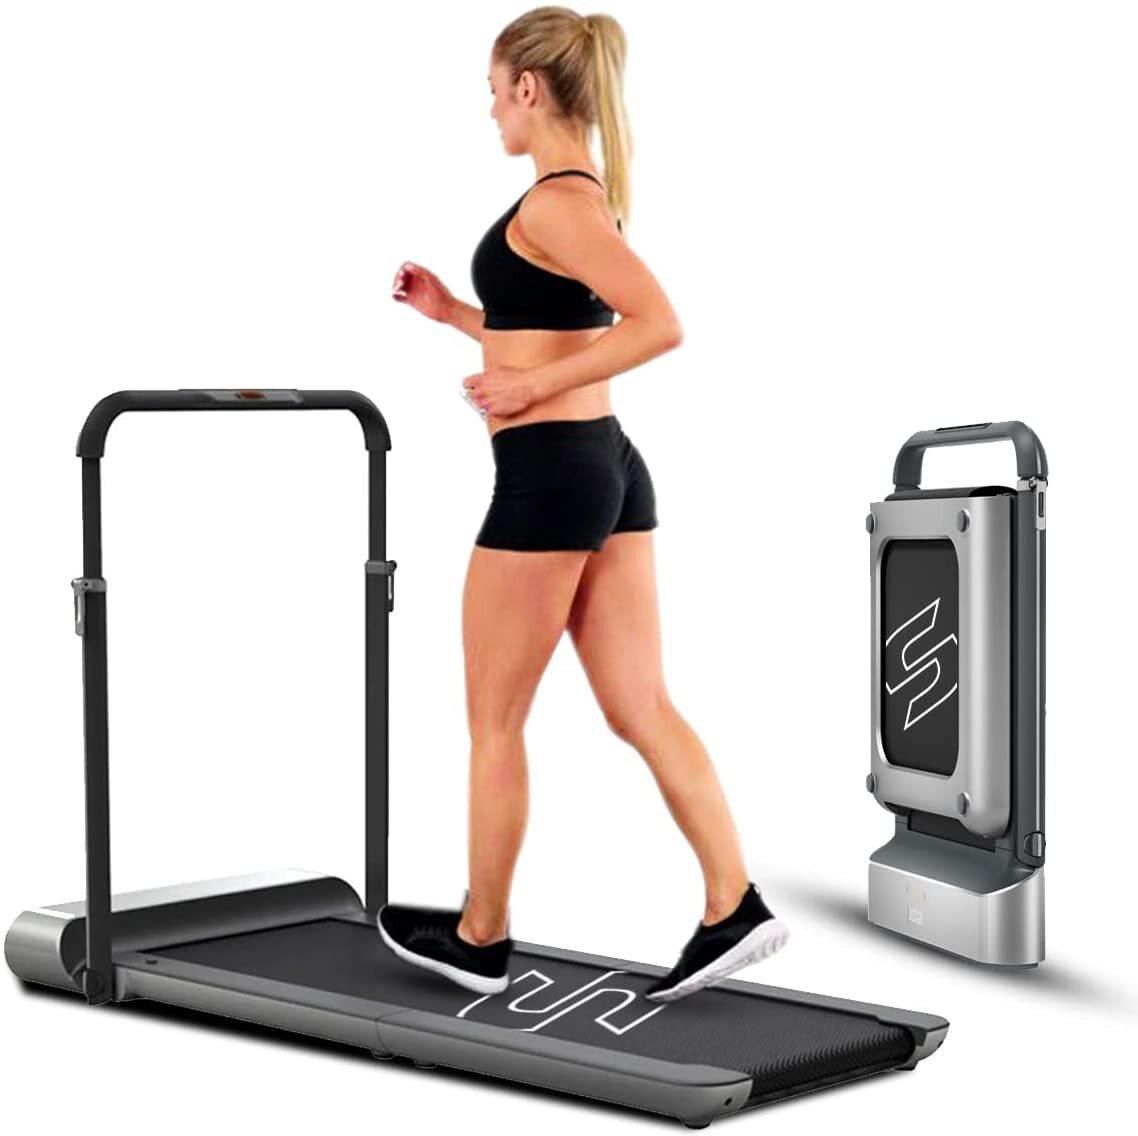 Sparnod Fitness STH-3050 5.5 HP Peak Motorized Under Desk Walking Pad Treadmill for Home Use Pre-Installed with Interactive LED Display, Foot Sensing Speed Control, Remote and App Control